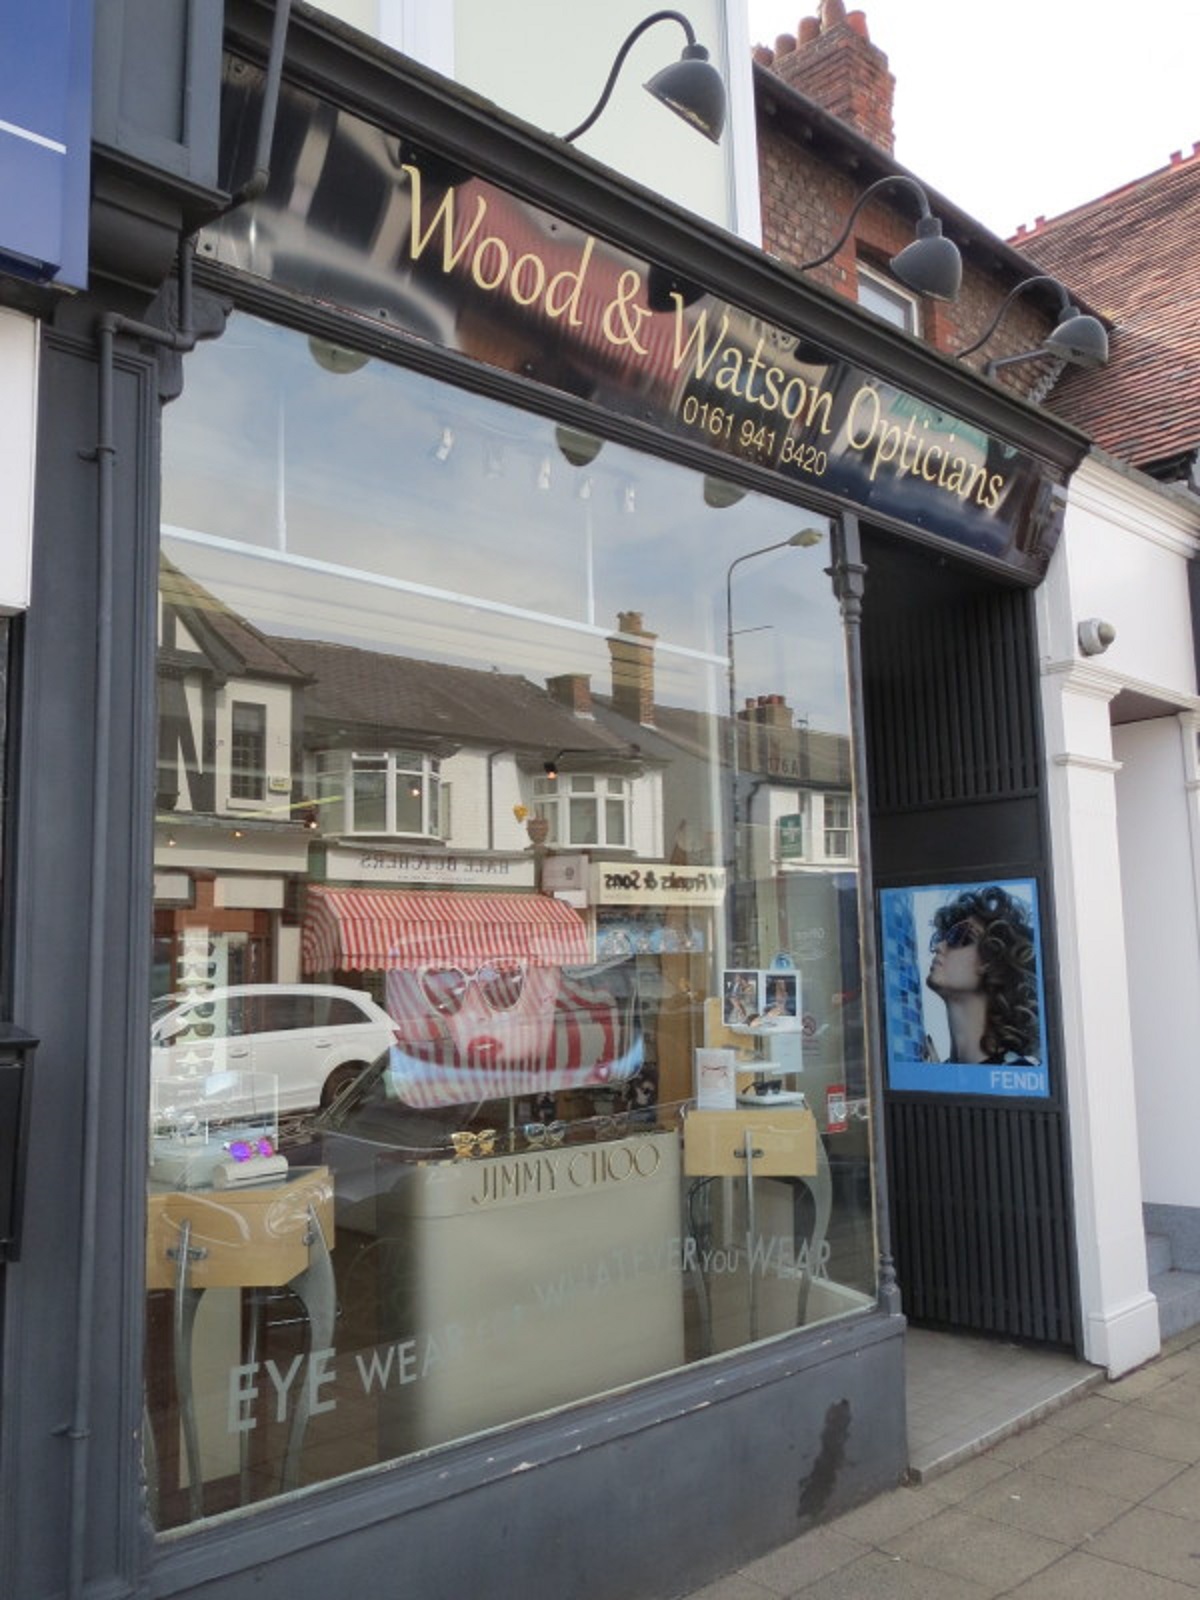 Wood and Watson opticians in Hale Village